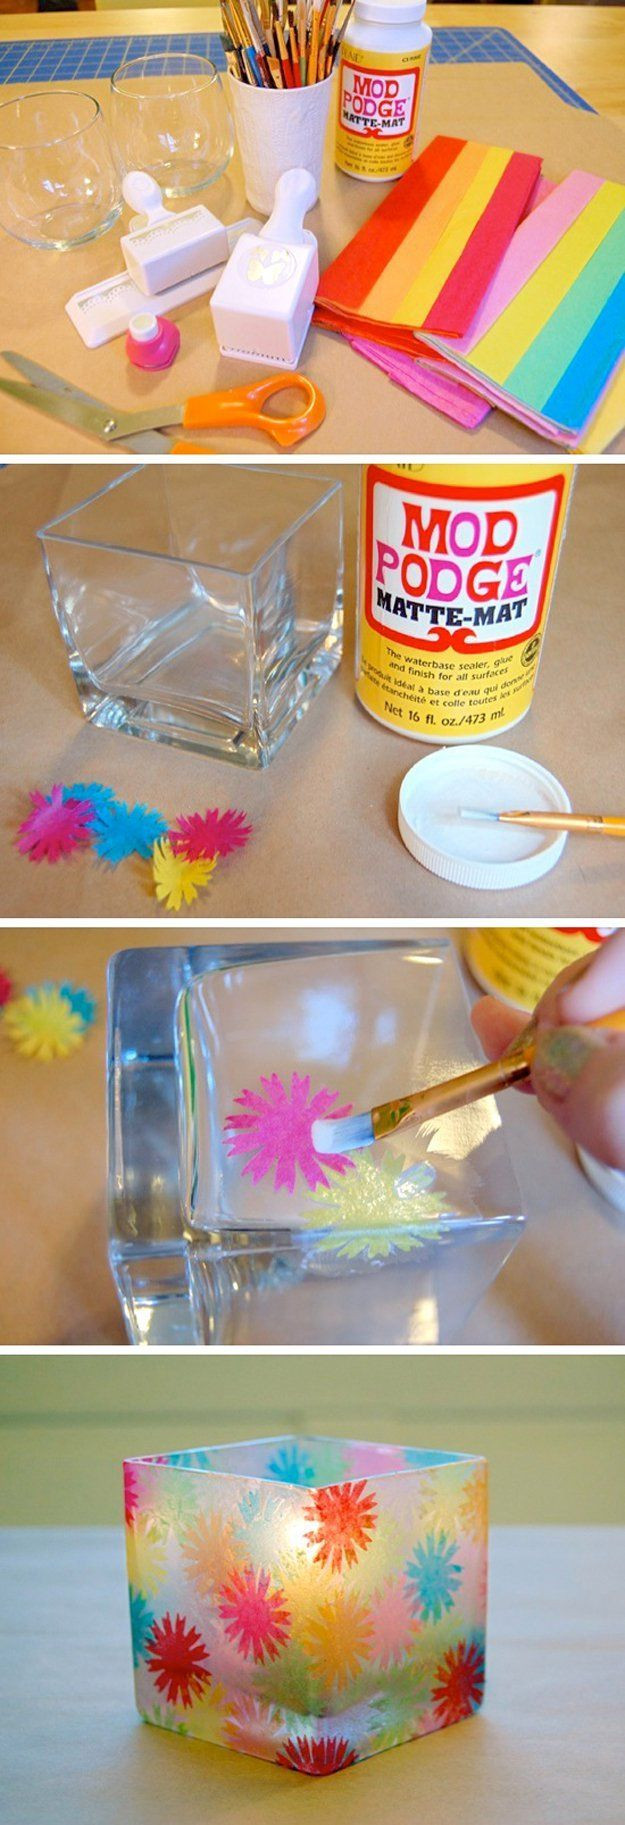 DIY Craft Projects For Adults
 25 best ideas about Easy Diy Crafts on Pinterest